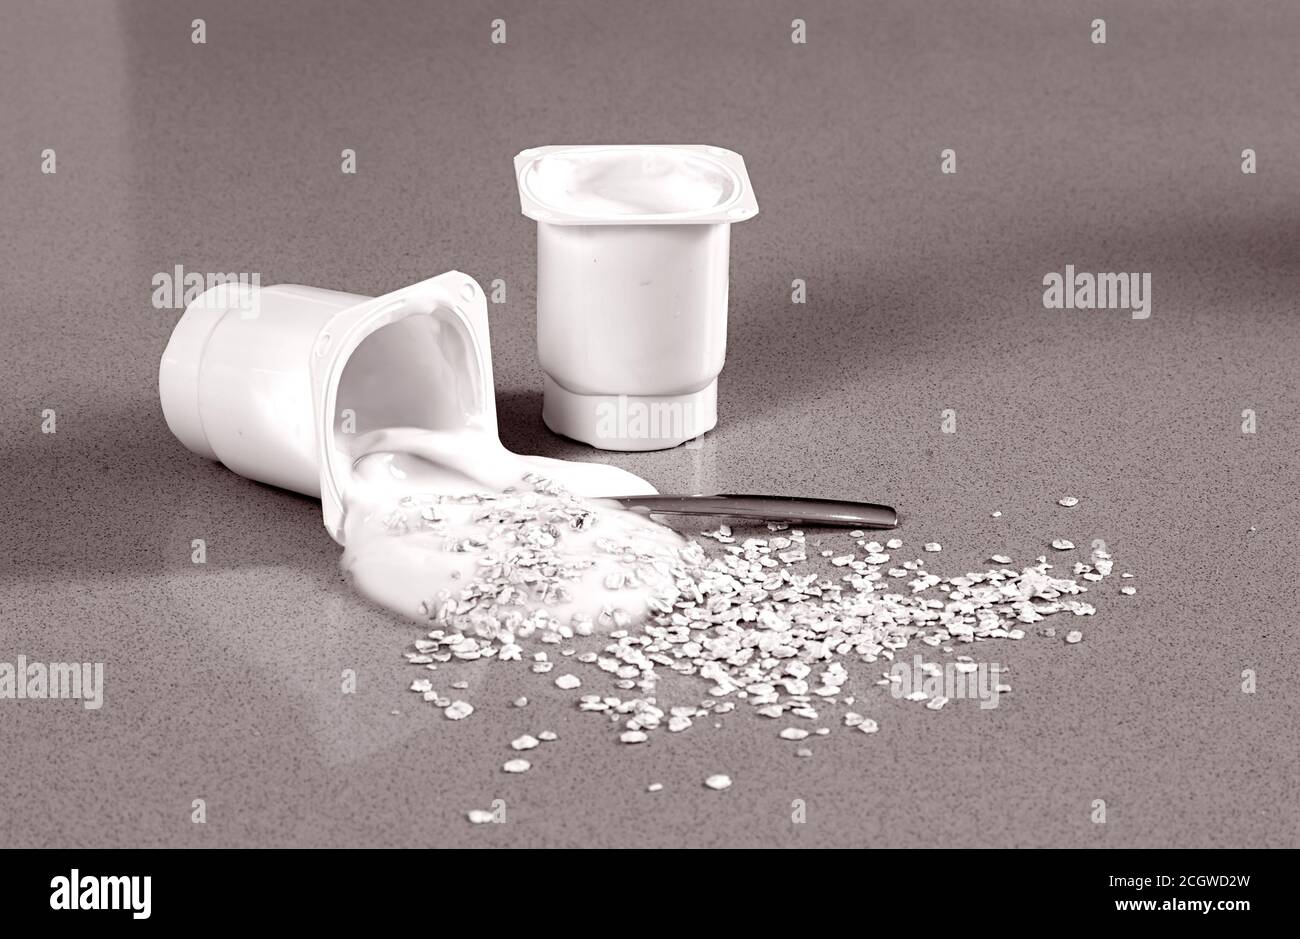 Cup of yoghurt with cereals someone has left spilt on the table Stock Photo